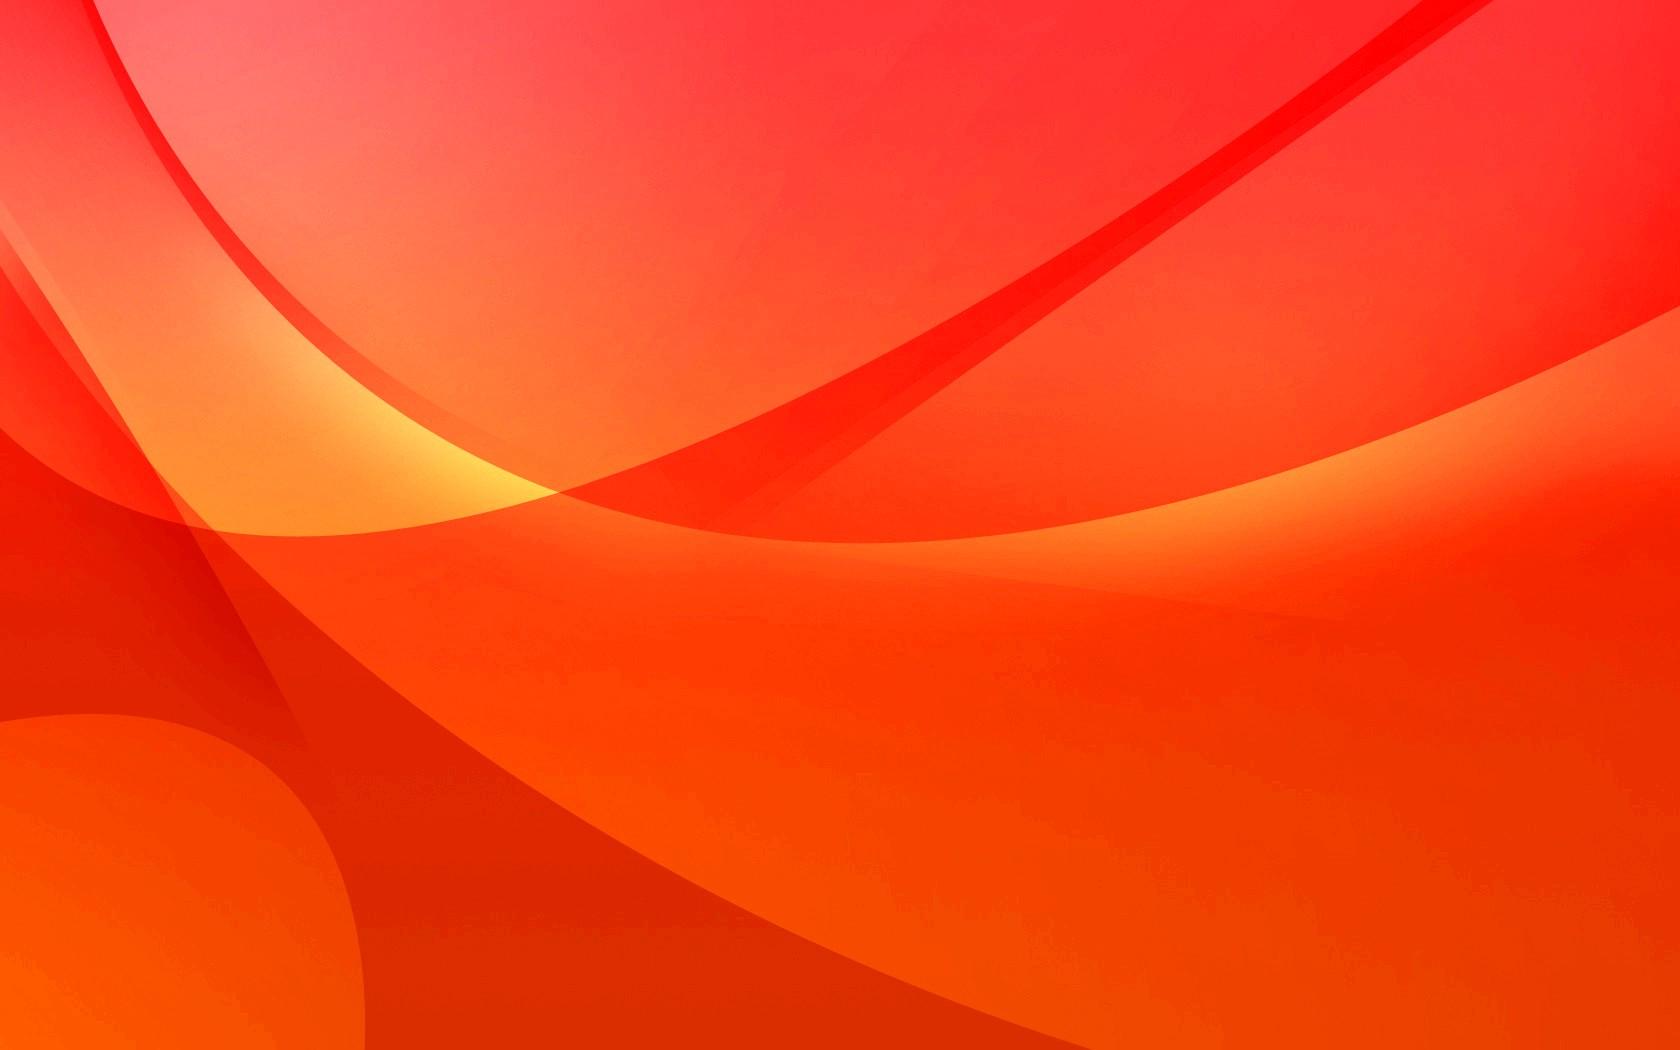 Red An Orange Gradient Abstract Wallpaper Image